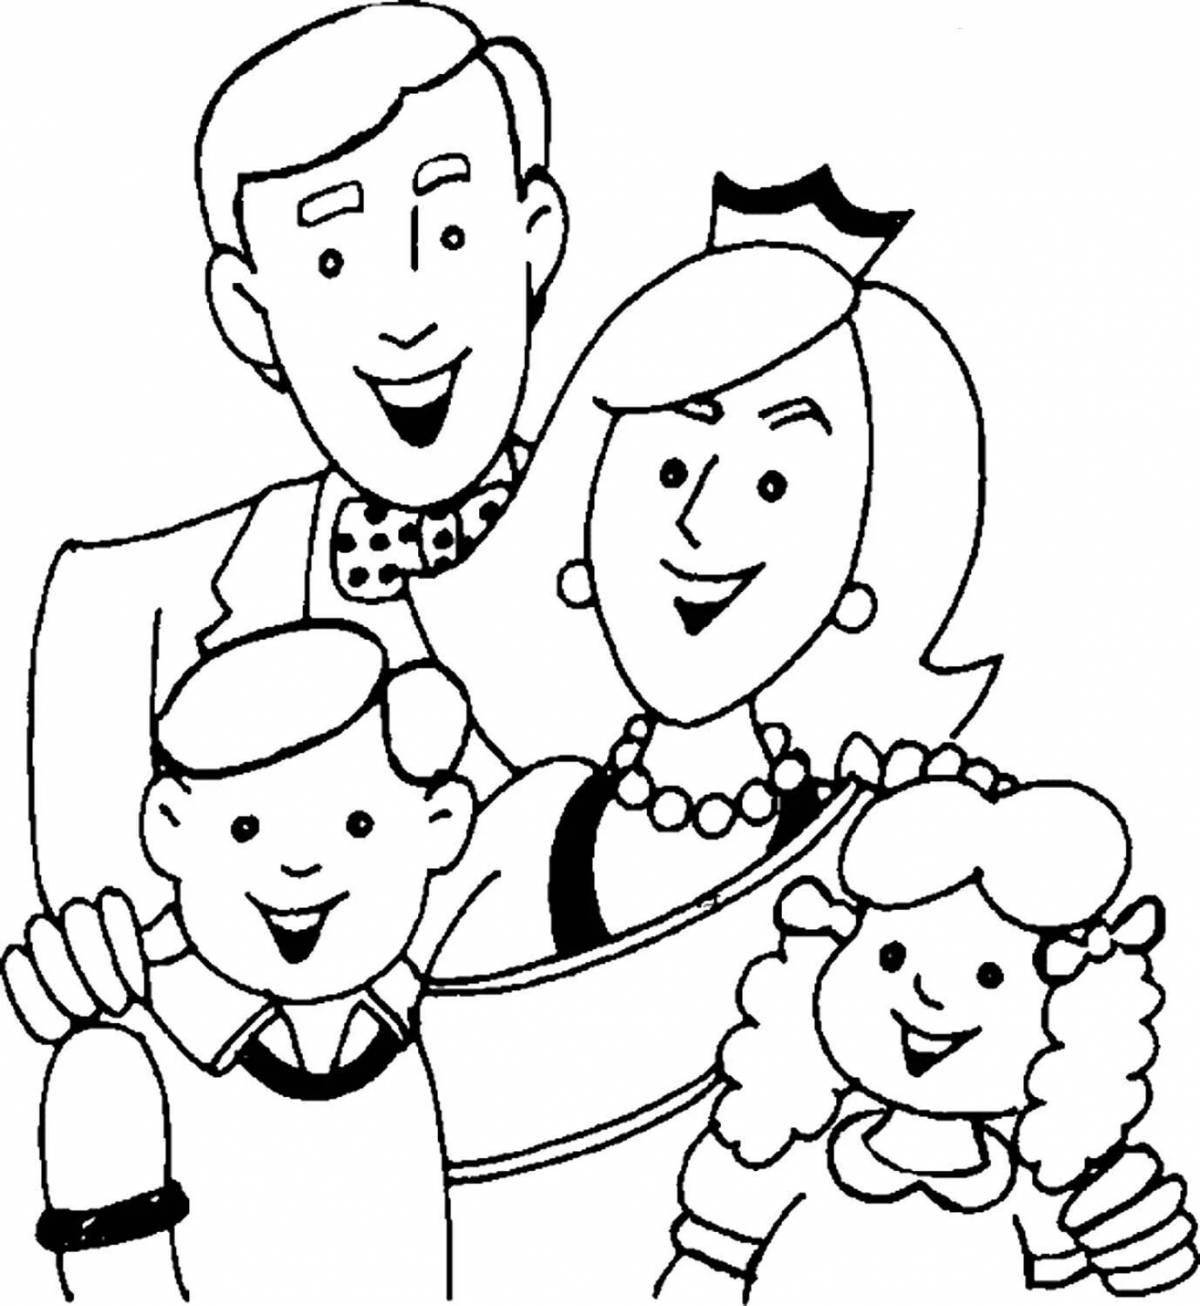 Colorful family coloring book